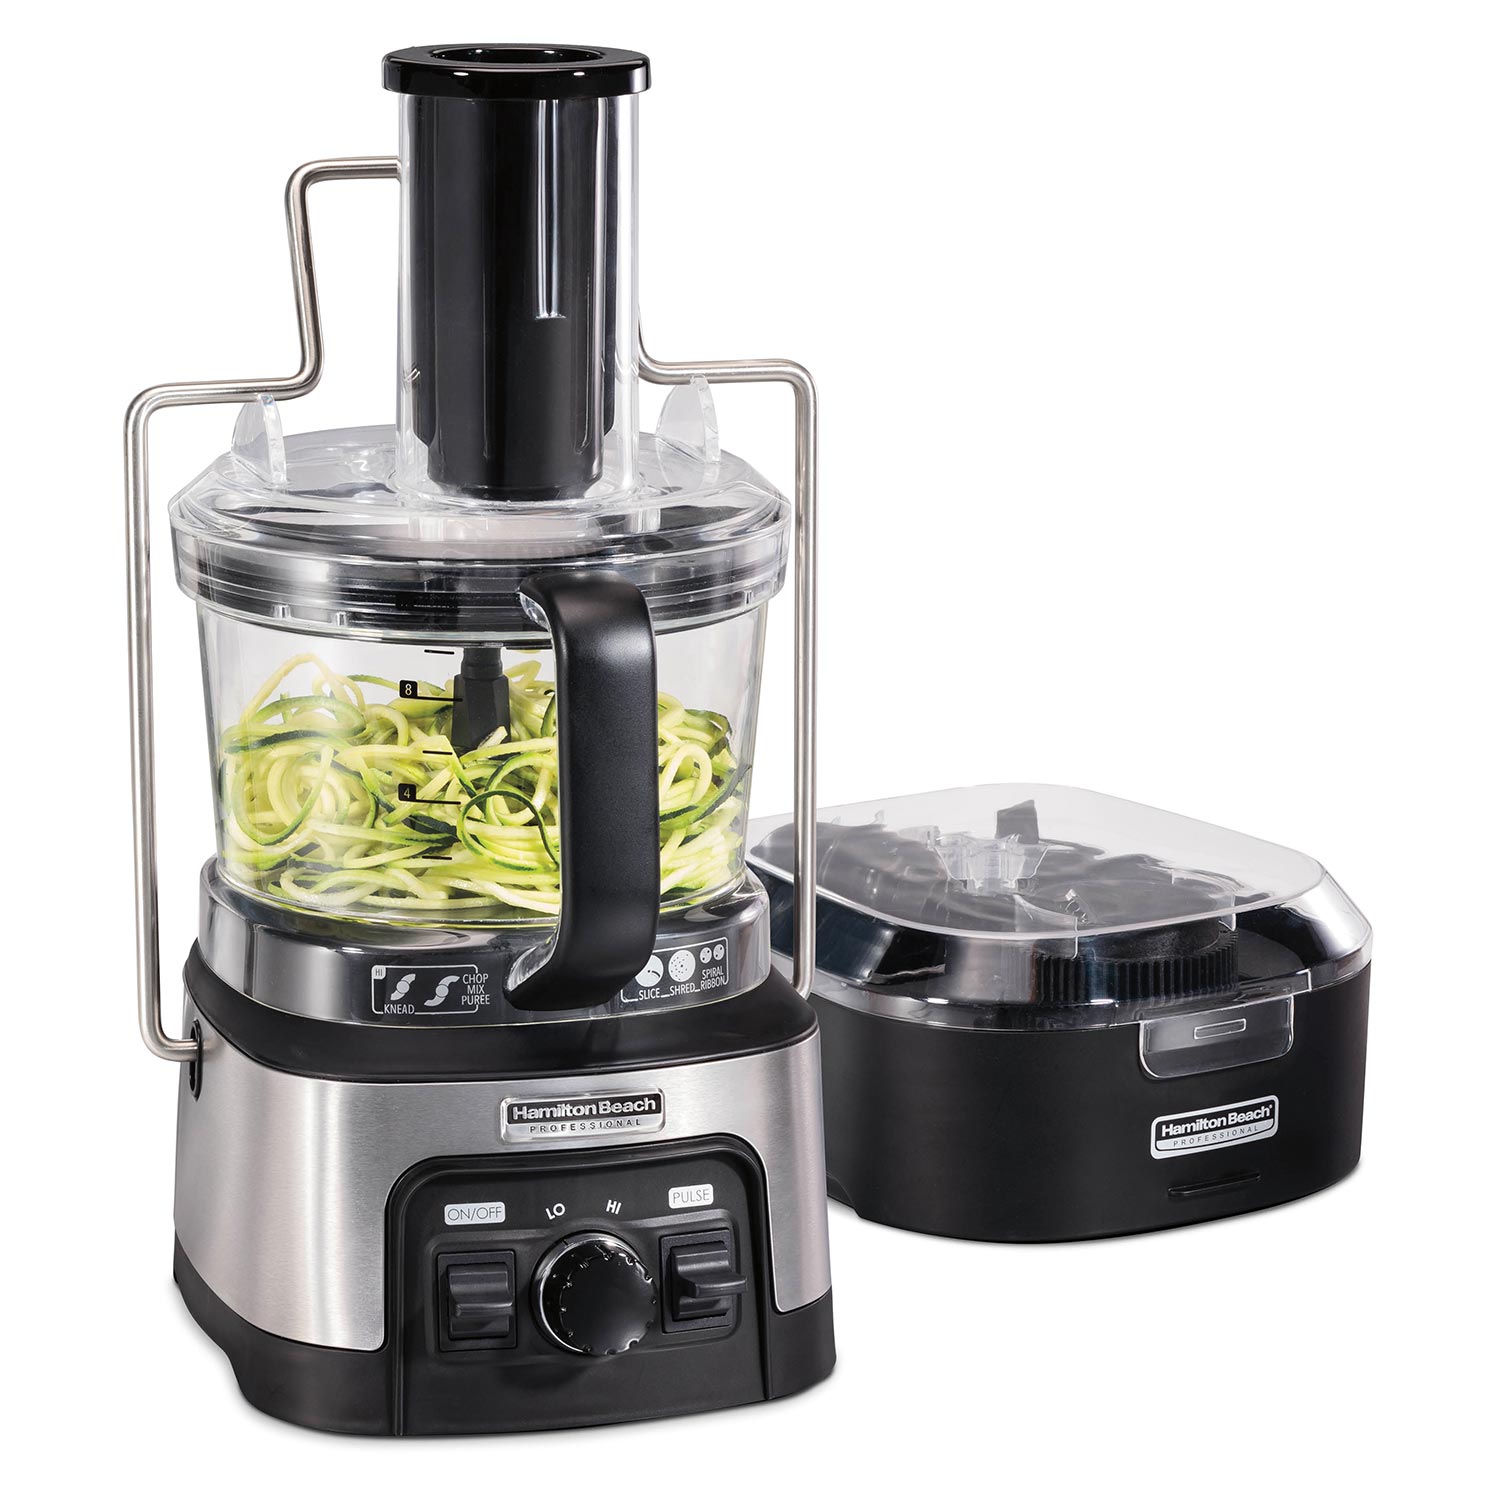 Purchase Spiralizing Food Processor now